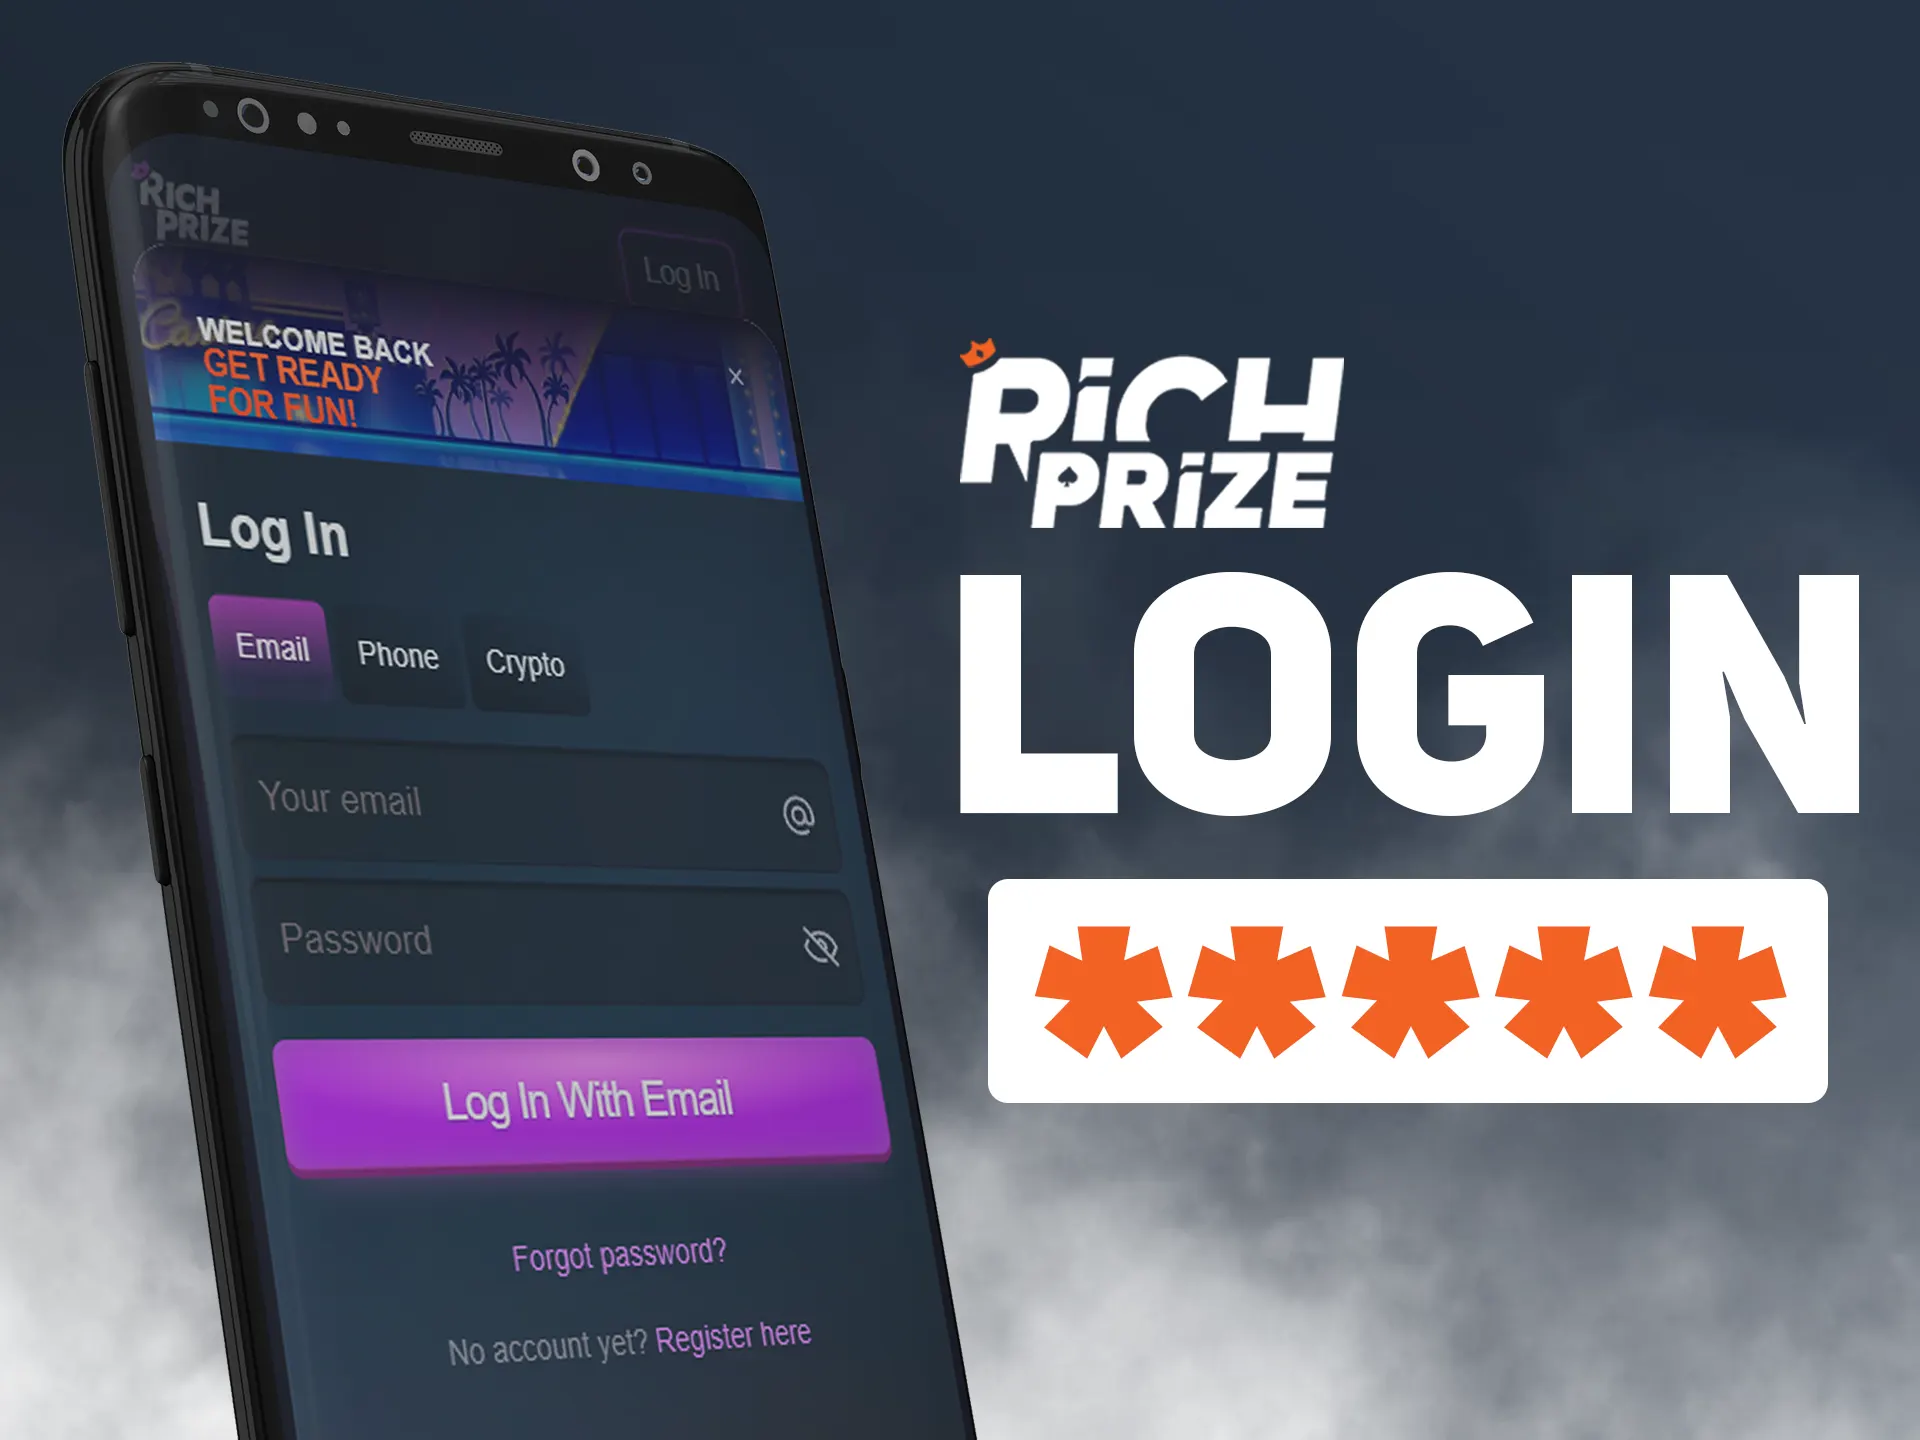 Insert your Richprize account information for log in.